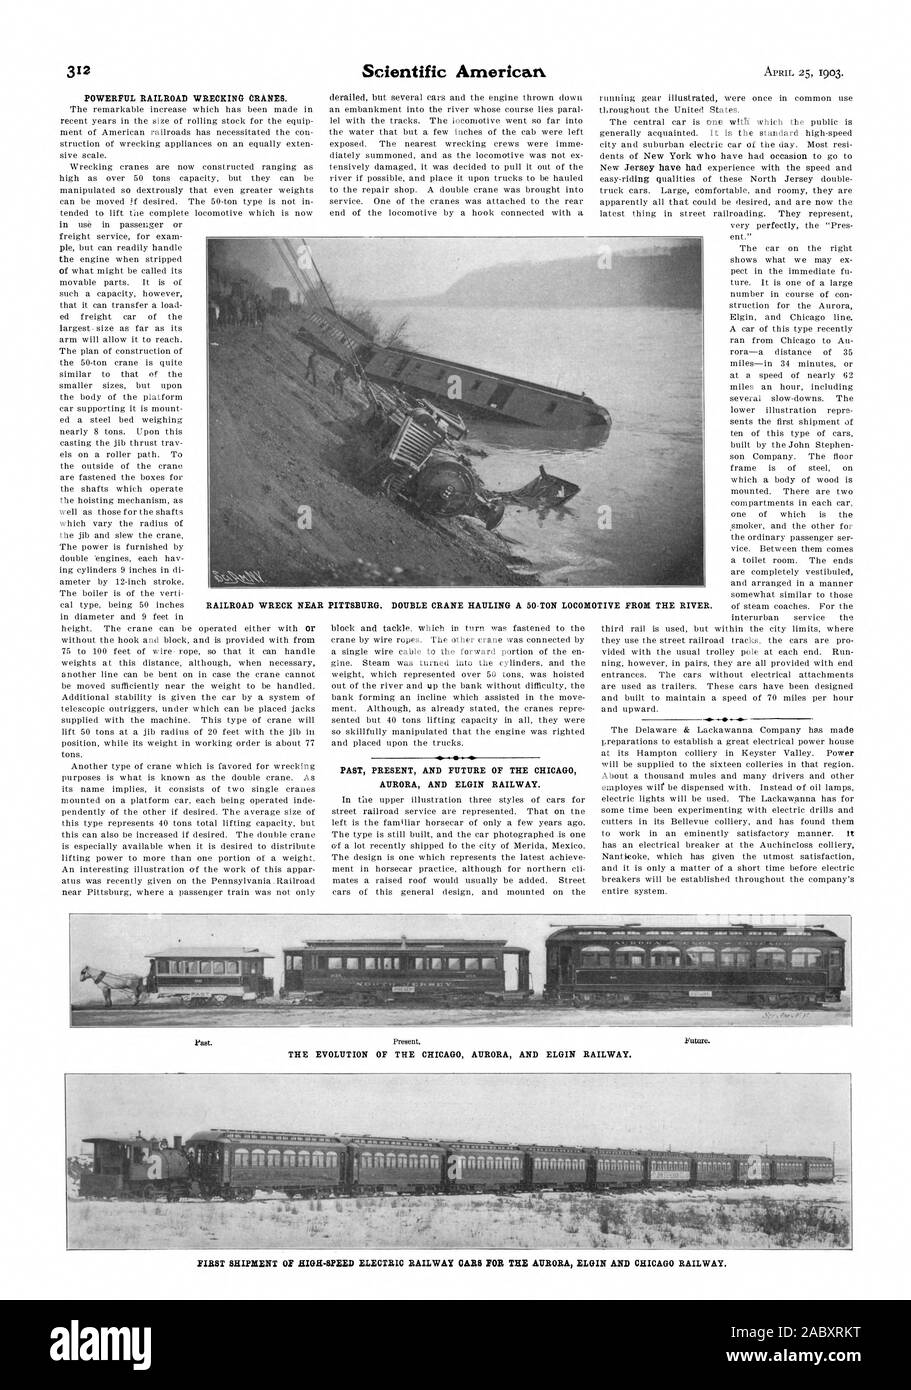 POWERFUL RAILROAD WRECKING CRANES. PAST PRESENT AND FUTURE OF THE CHICAG AURORA AND ELGIN RAILWAY. -:-; FIRST SHIPMENT OF HIGH-SPEED ELECTRIC RAILWAY CARS FOR THE AURORA ELGIN AND CHICAGO RAILWAY., scientific american, 1903-04-25 Stock Photo